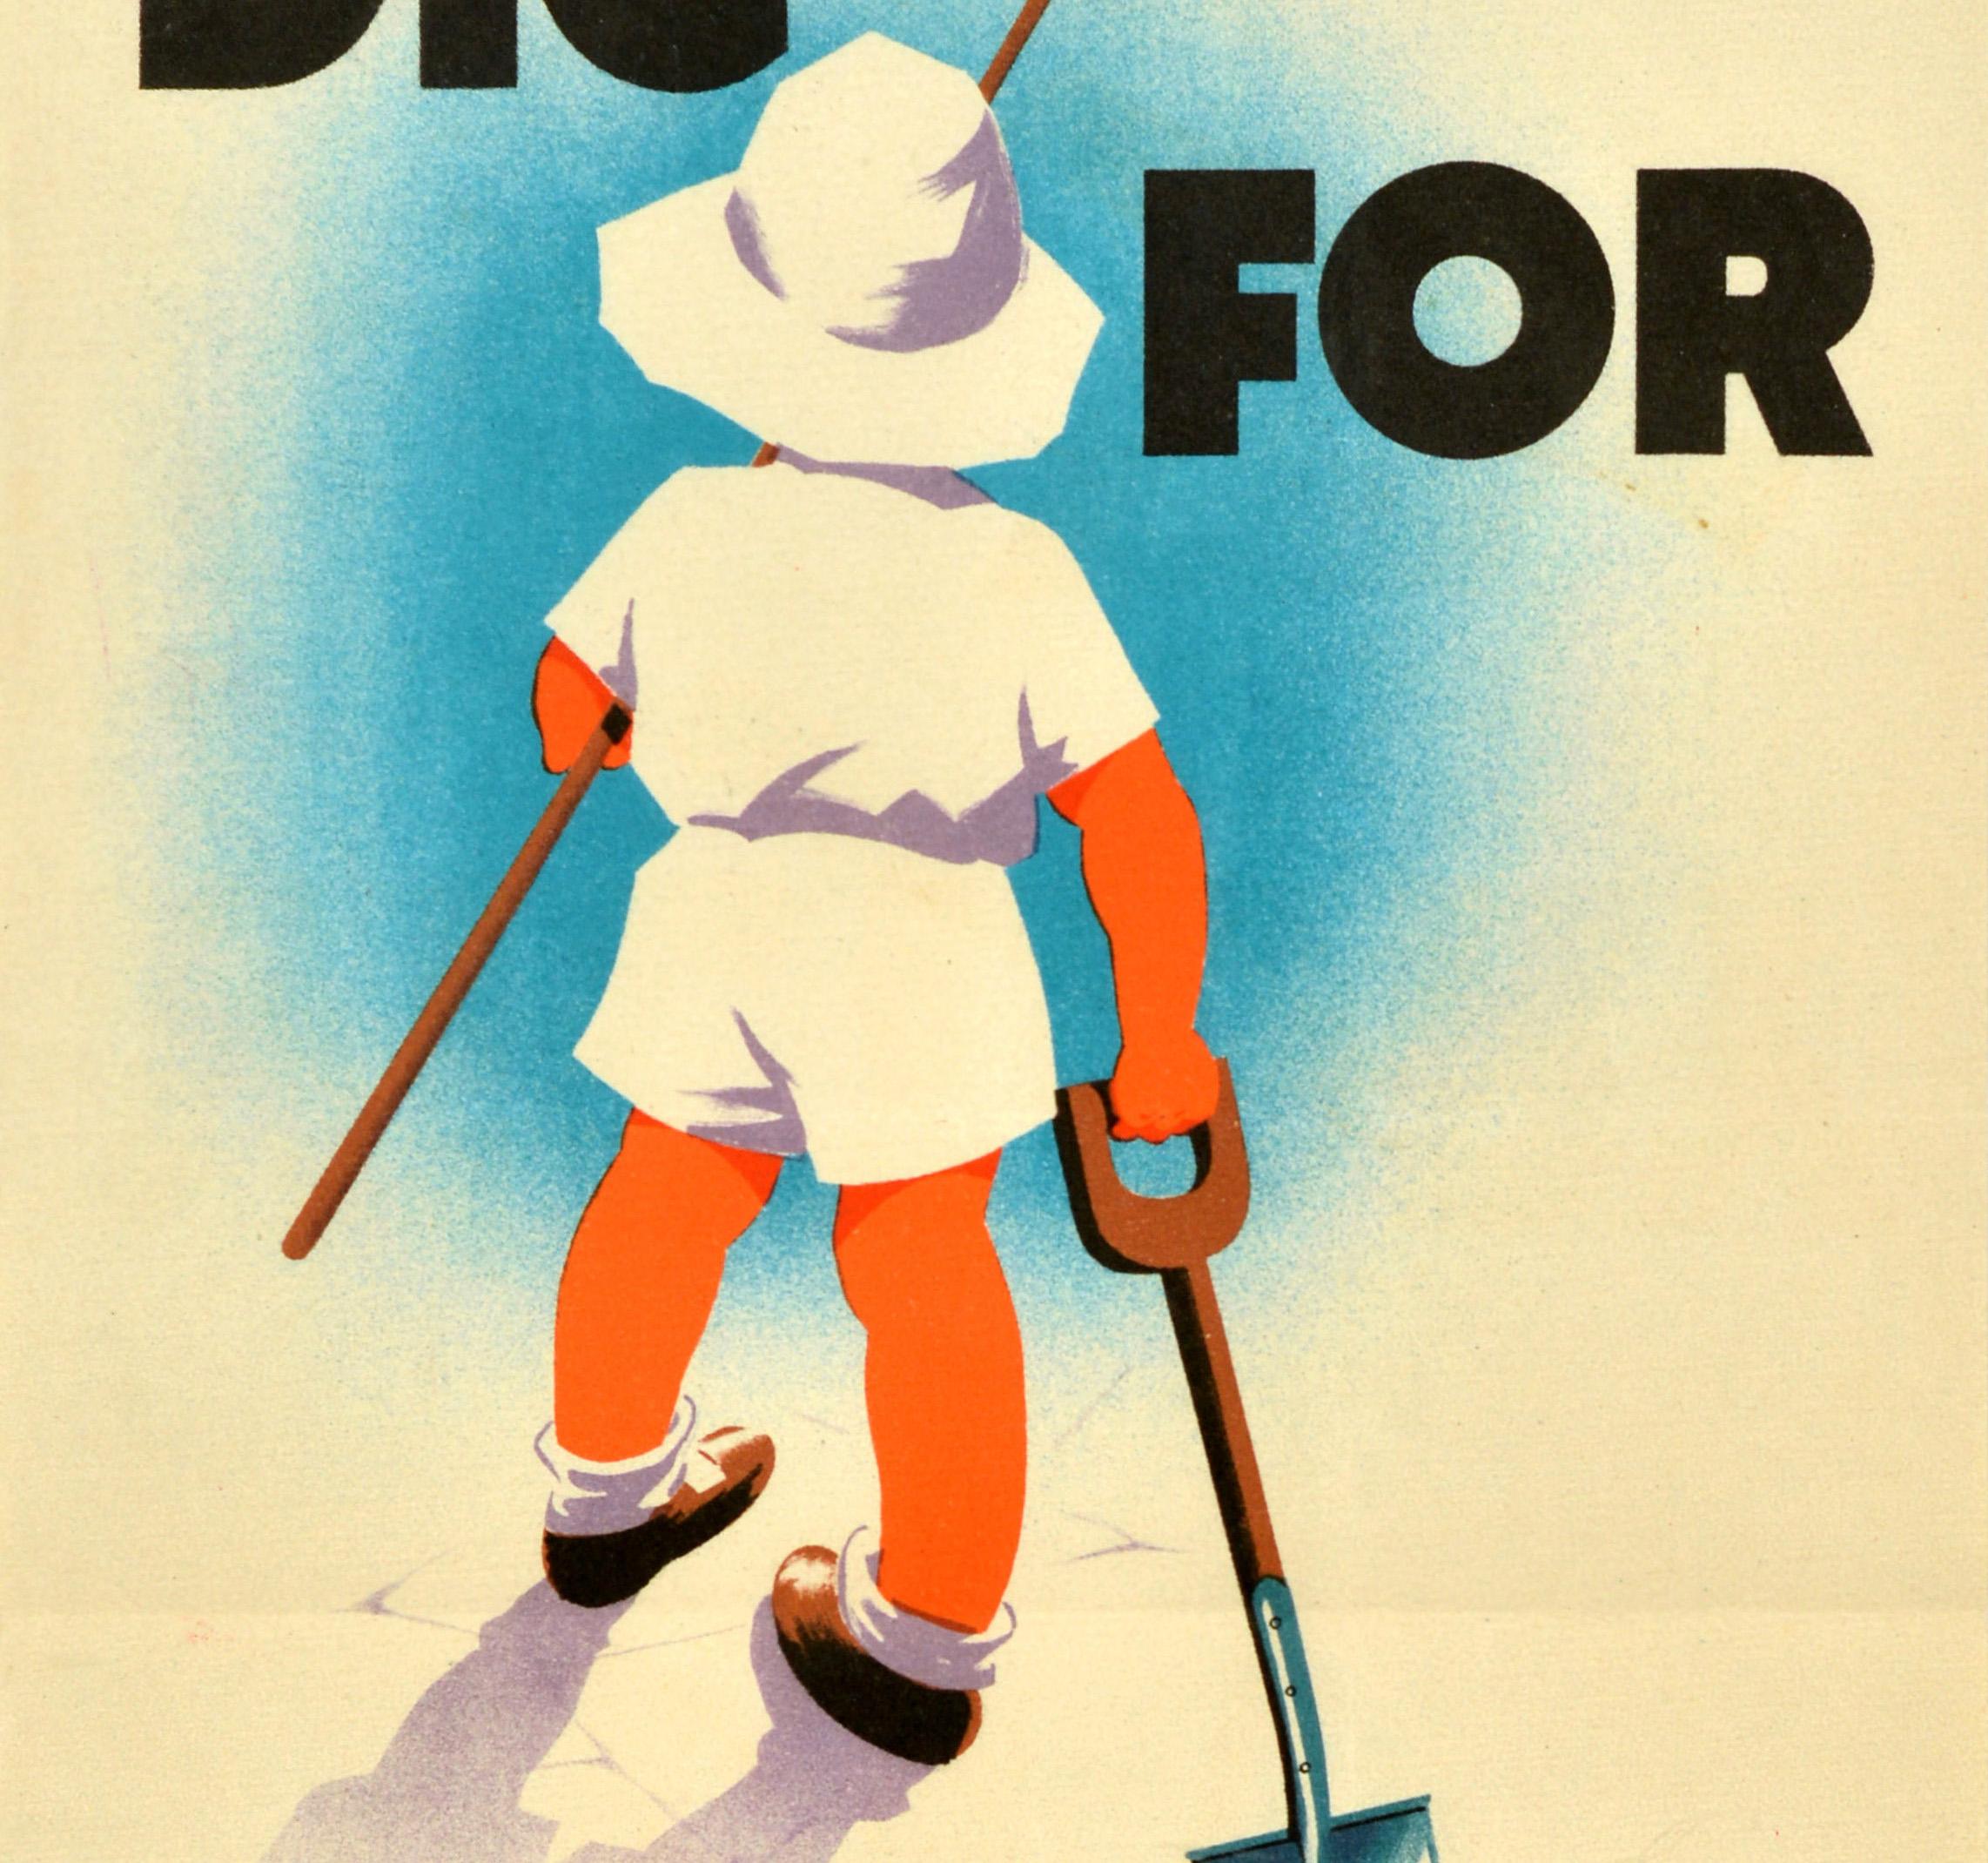 Original vintage World War Two Home Front propaganda poster - Dig for Victory - featuring an iconic illustration of a child wearing a white sun hat and holding a hoe and a shovel to help with gardening and farming during the period of war rations